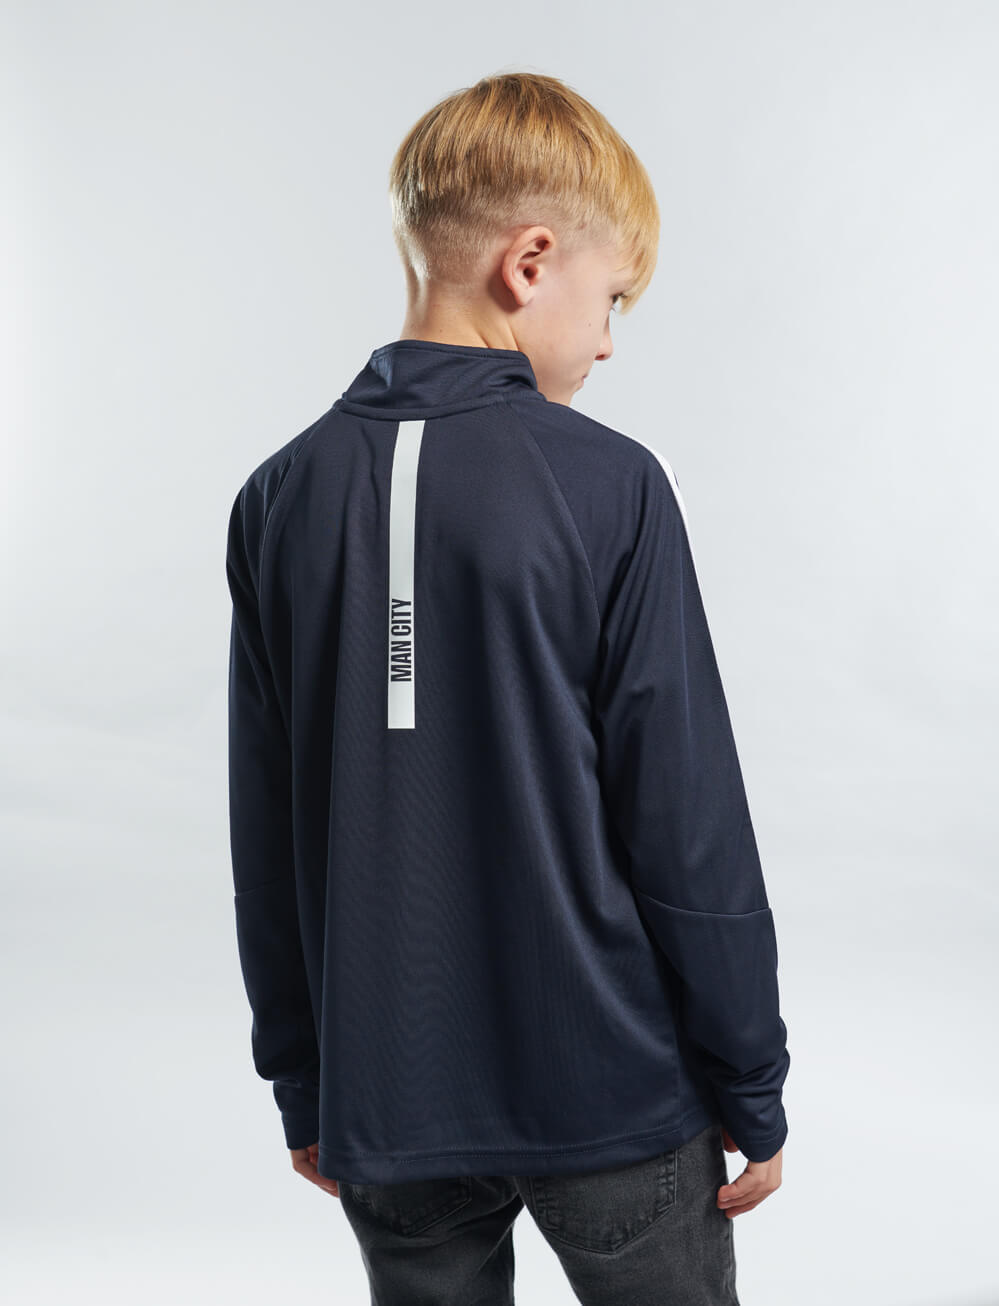 Official Manchester City Kids 1/4 Zip Track Top - Navy - The World Football Store